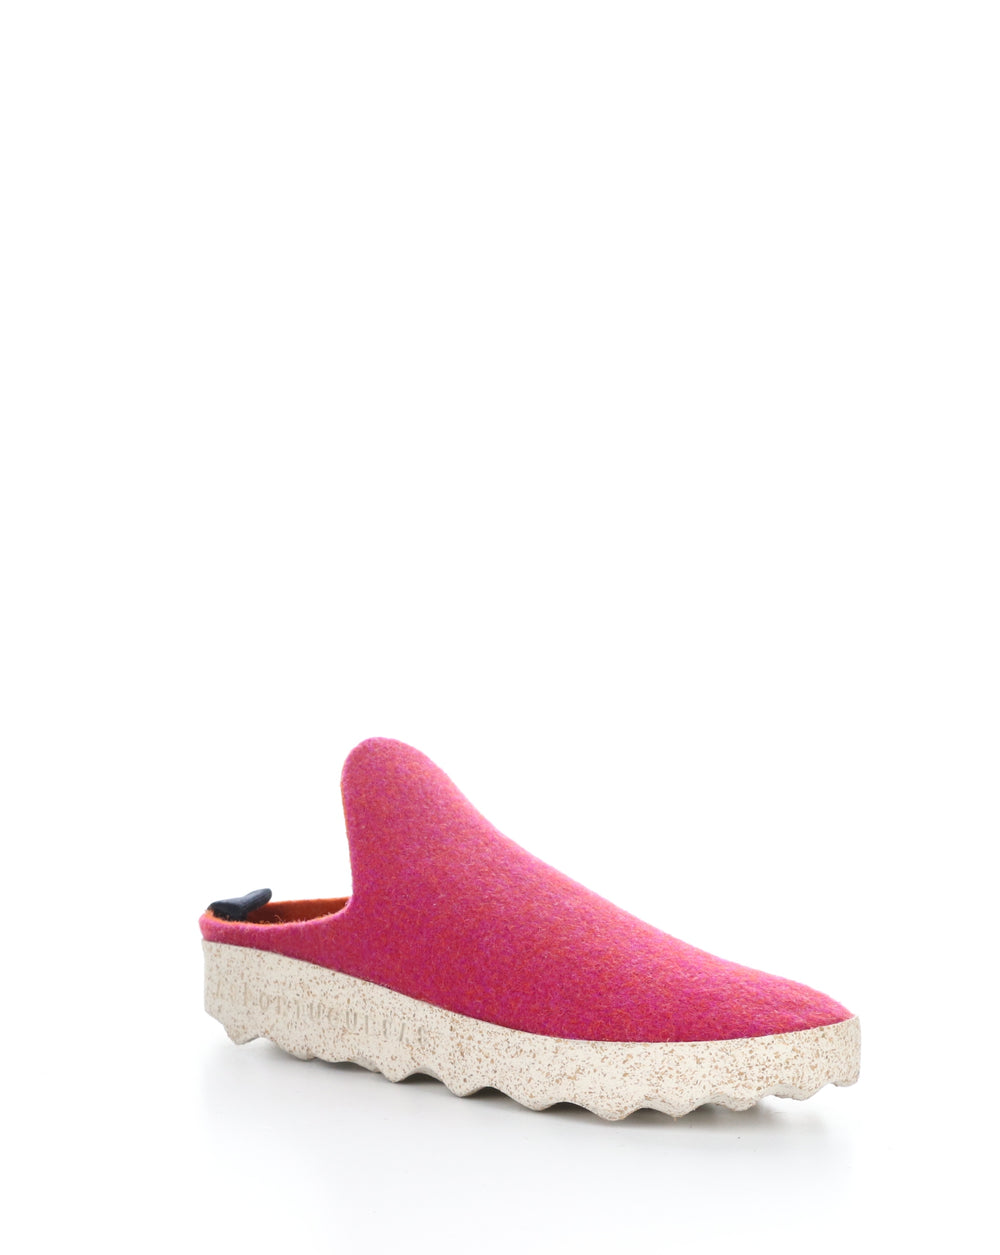 COME023ASP Pink Slip-on Mules